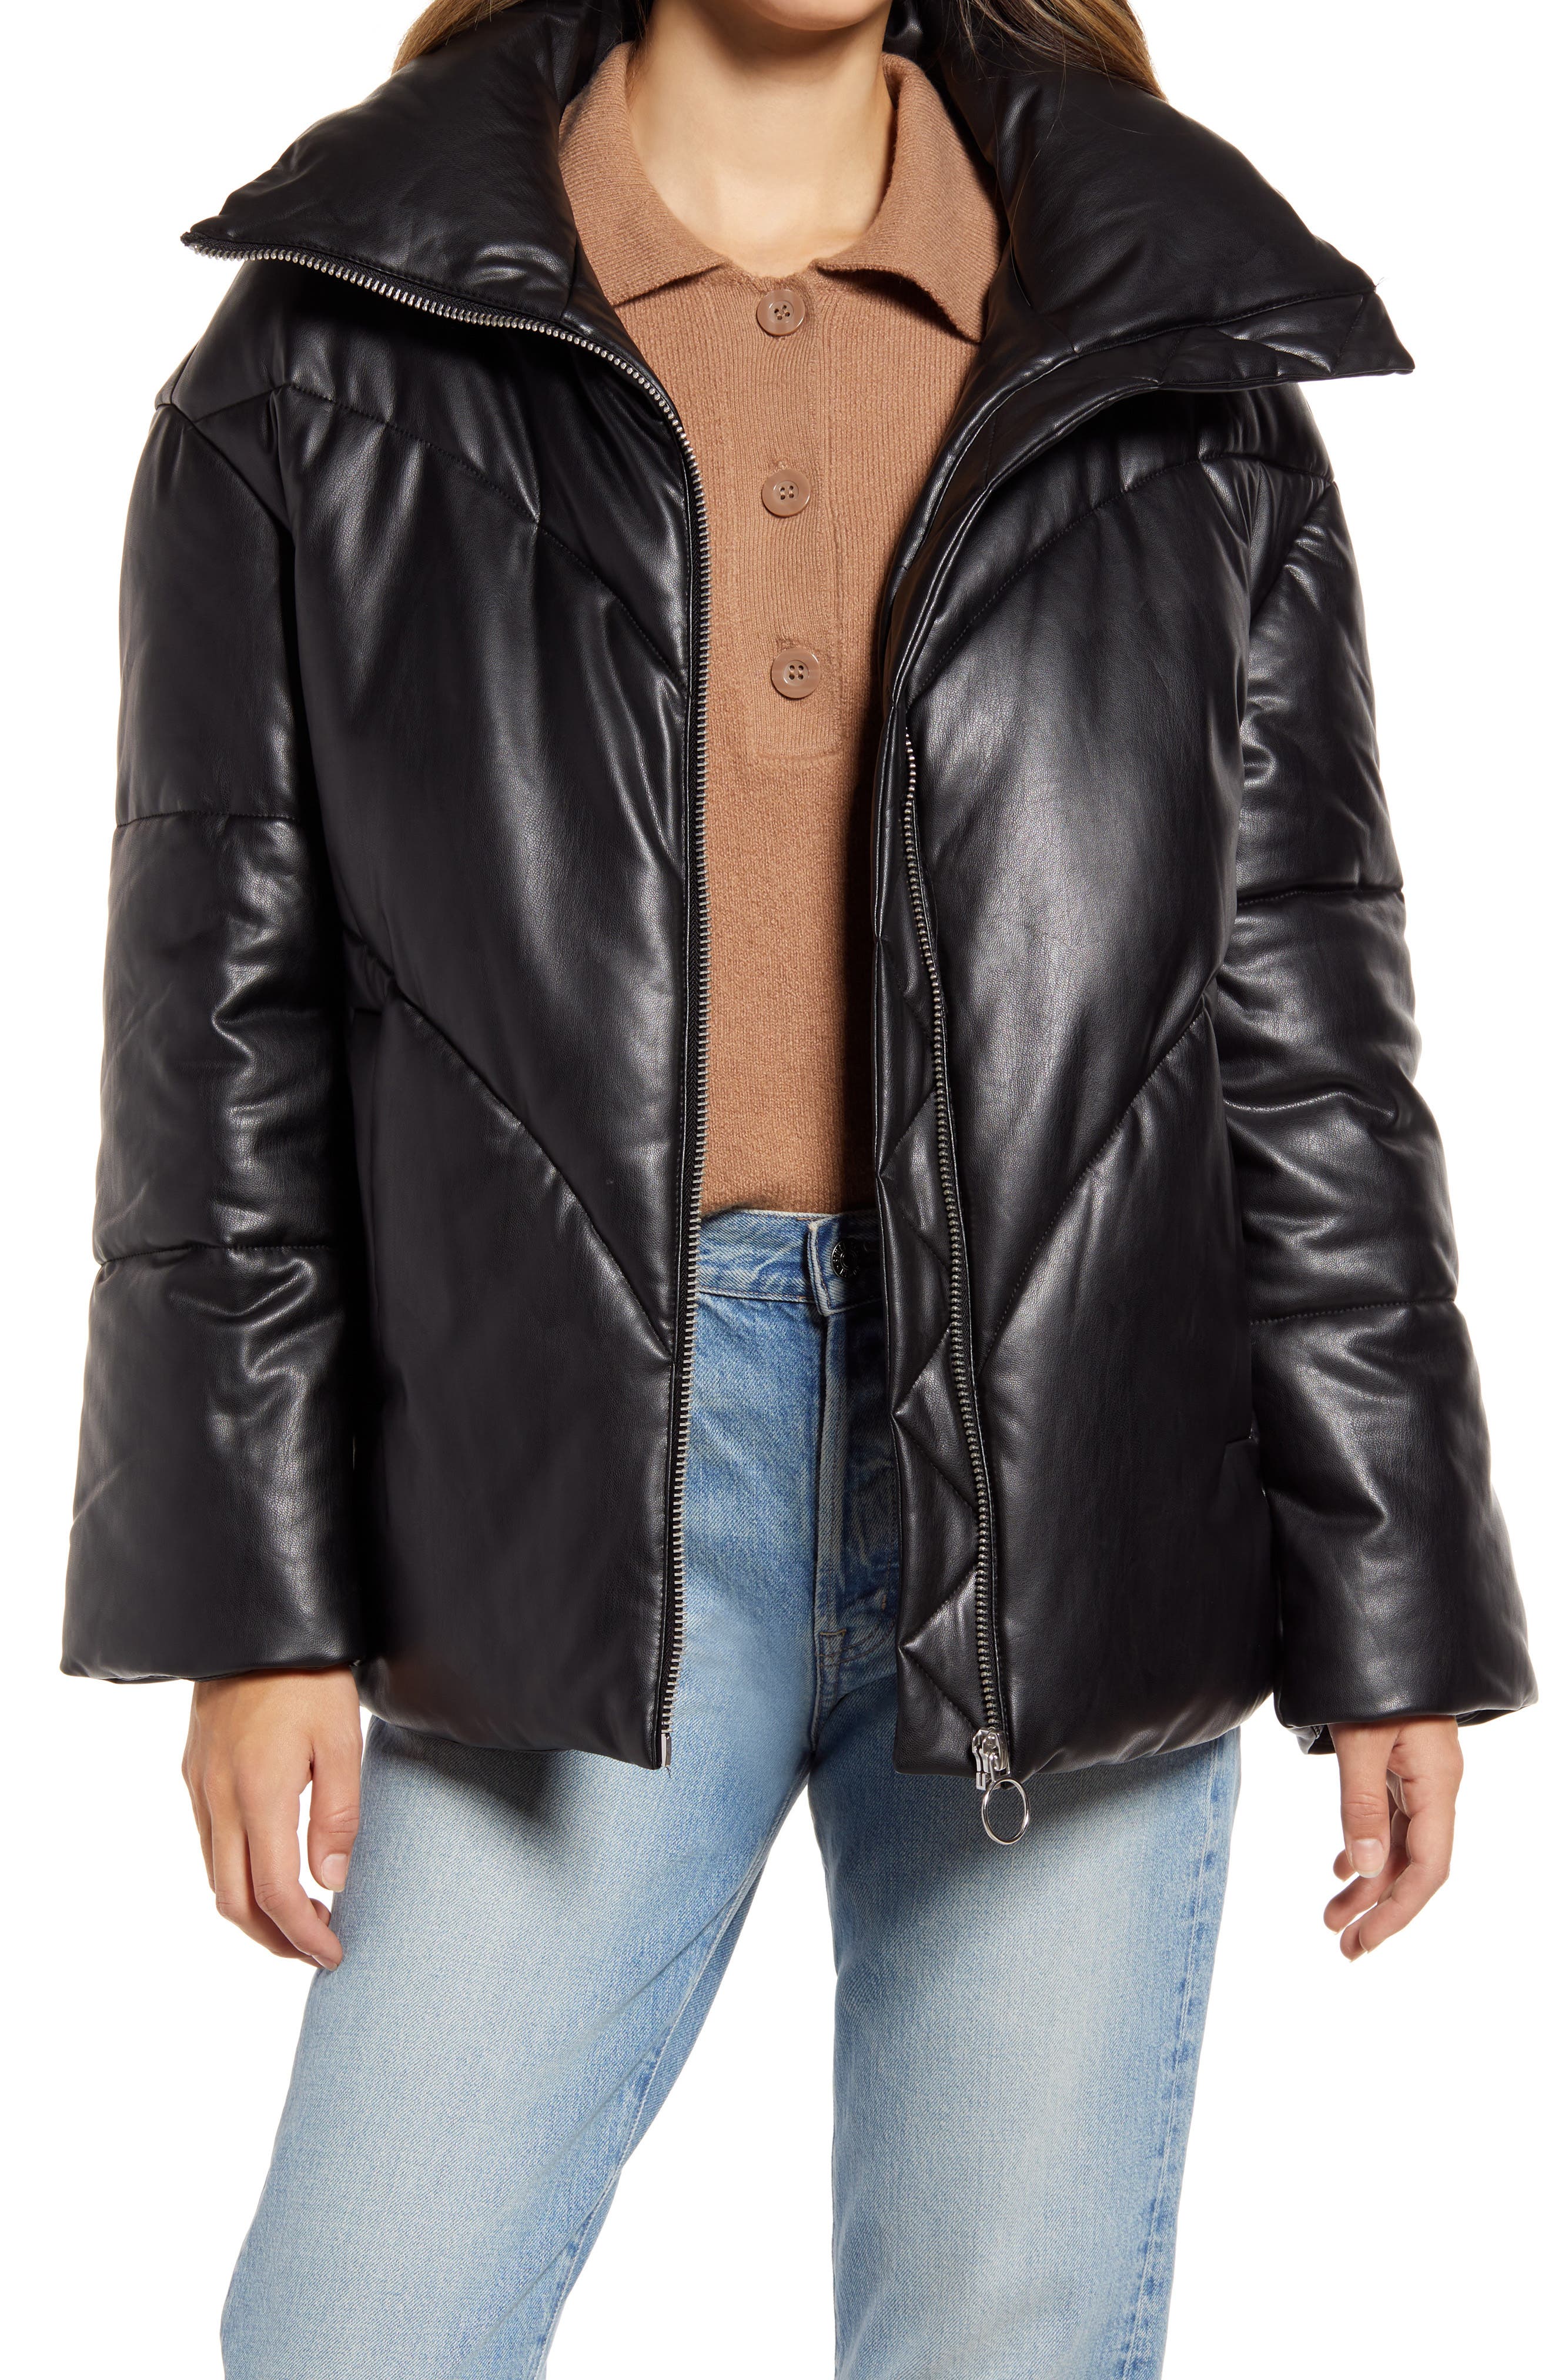 Puffer Leather \u0026 Faux Leather Jackets 